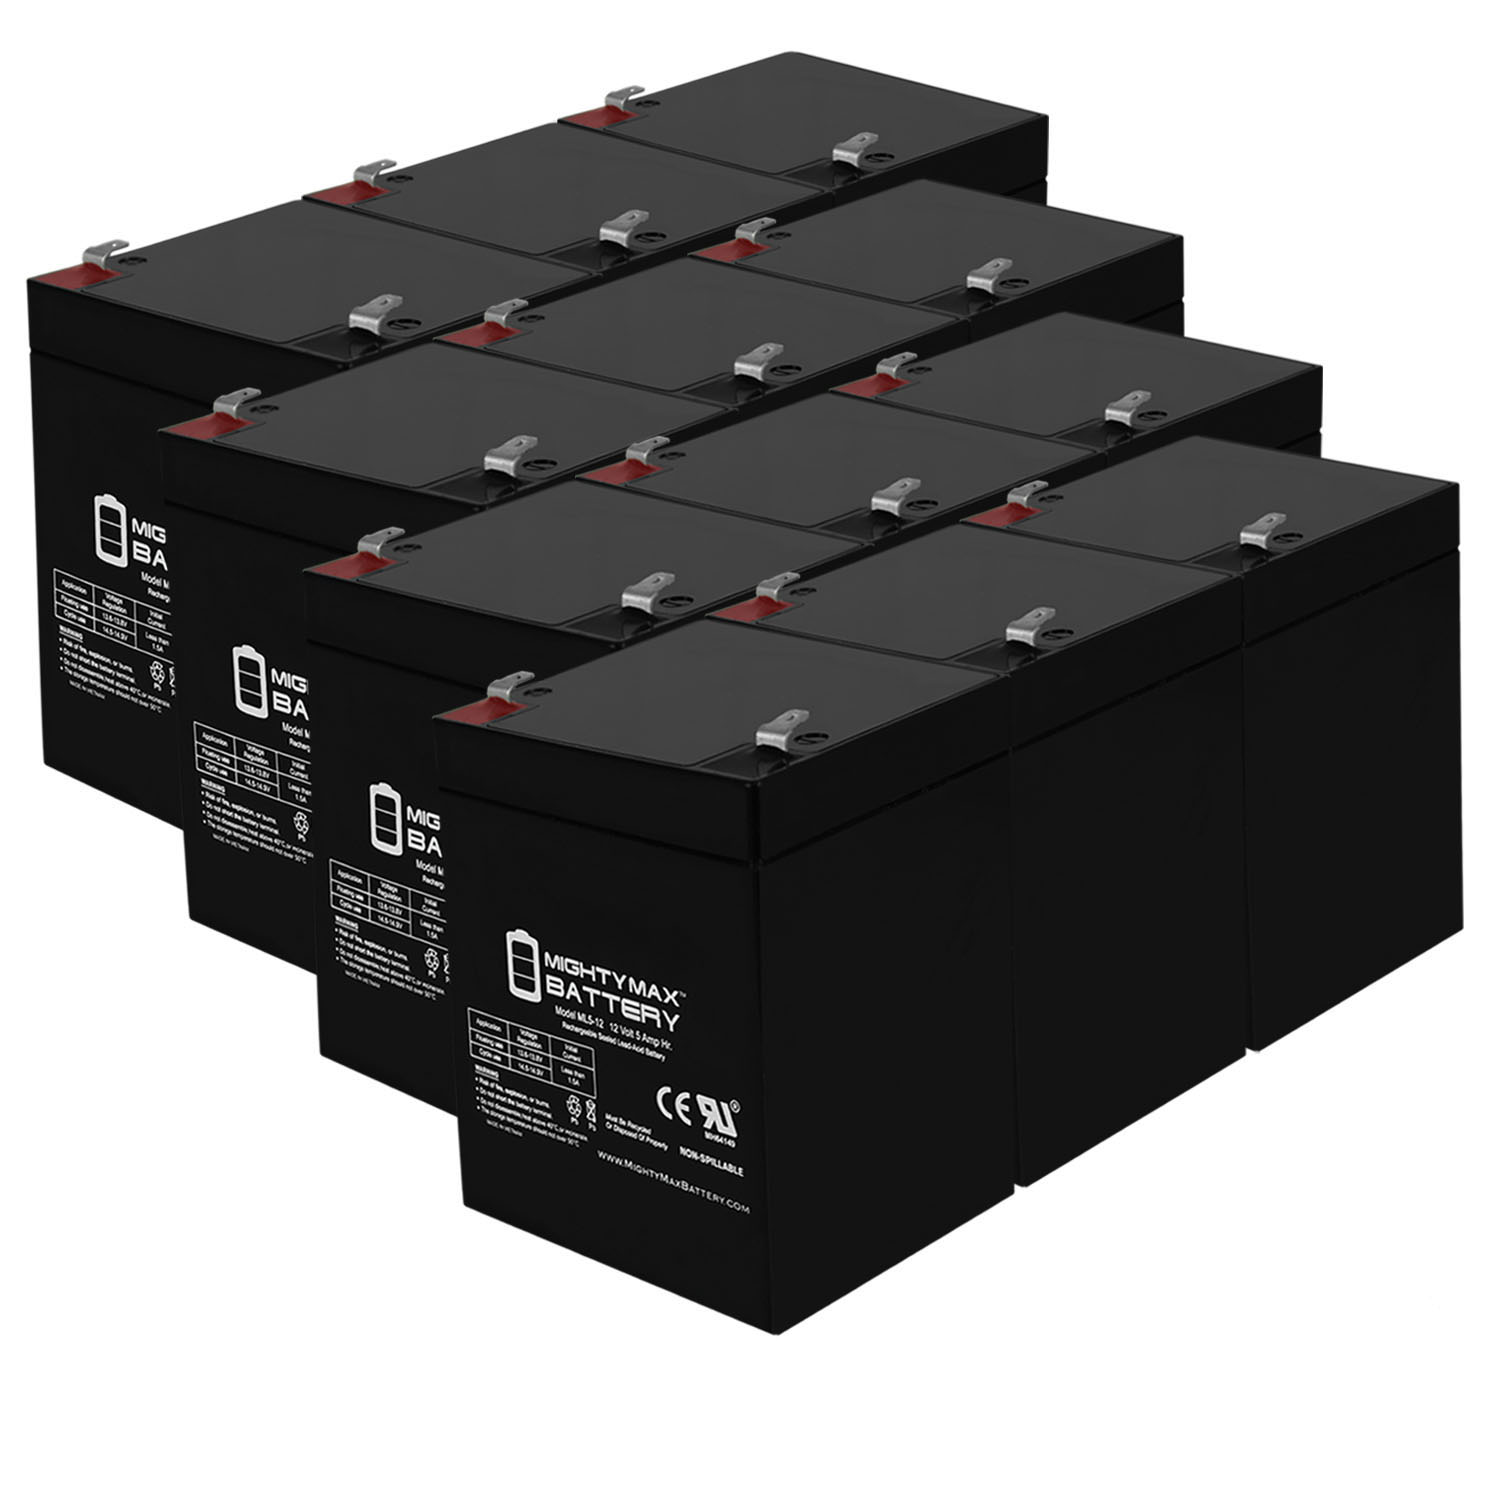 12V 5AH SLA Replacement Battery for Toshiba 1200 - 12 Pack